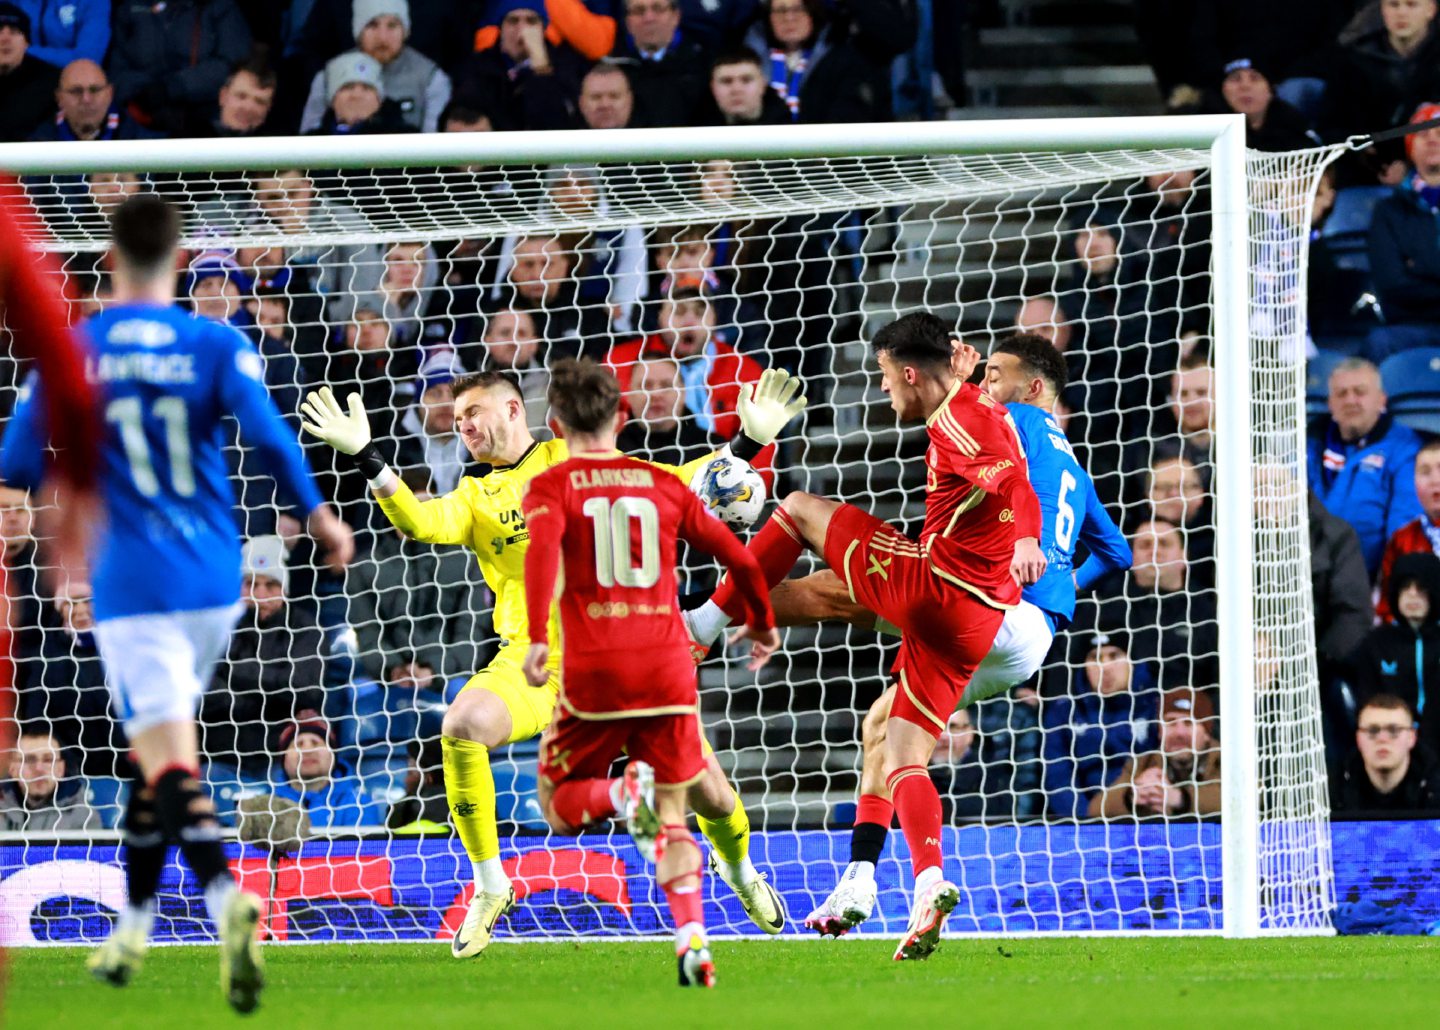 Aberdeen's Bojan Miovski scores in the 2-1 loss to Rangers at Ibrox. Image: PA